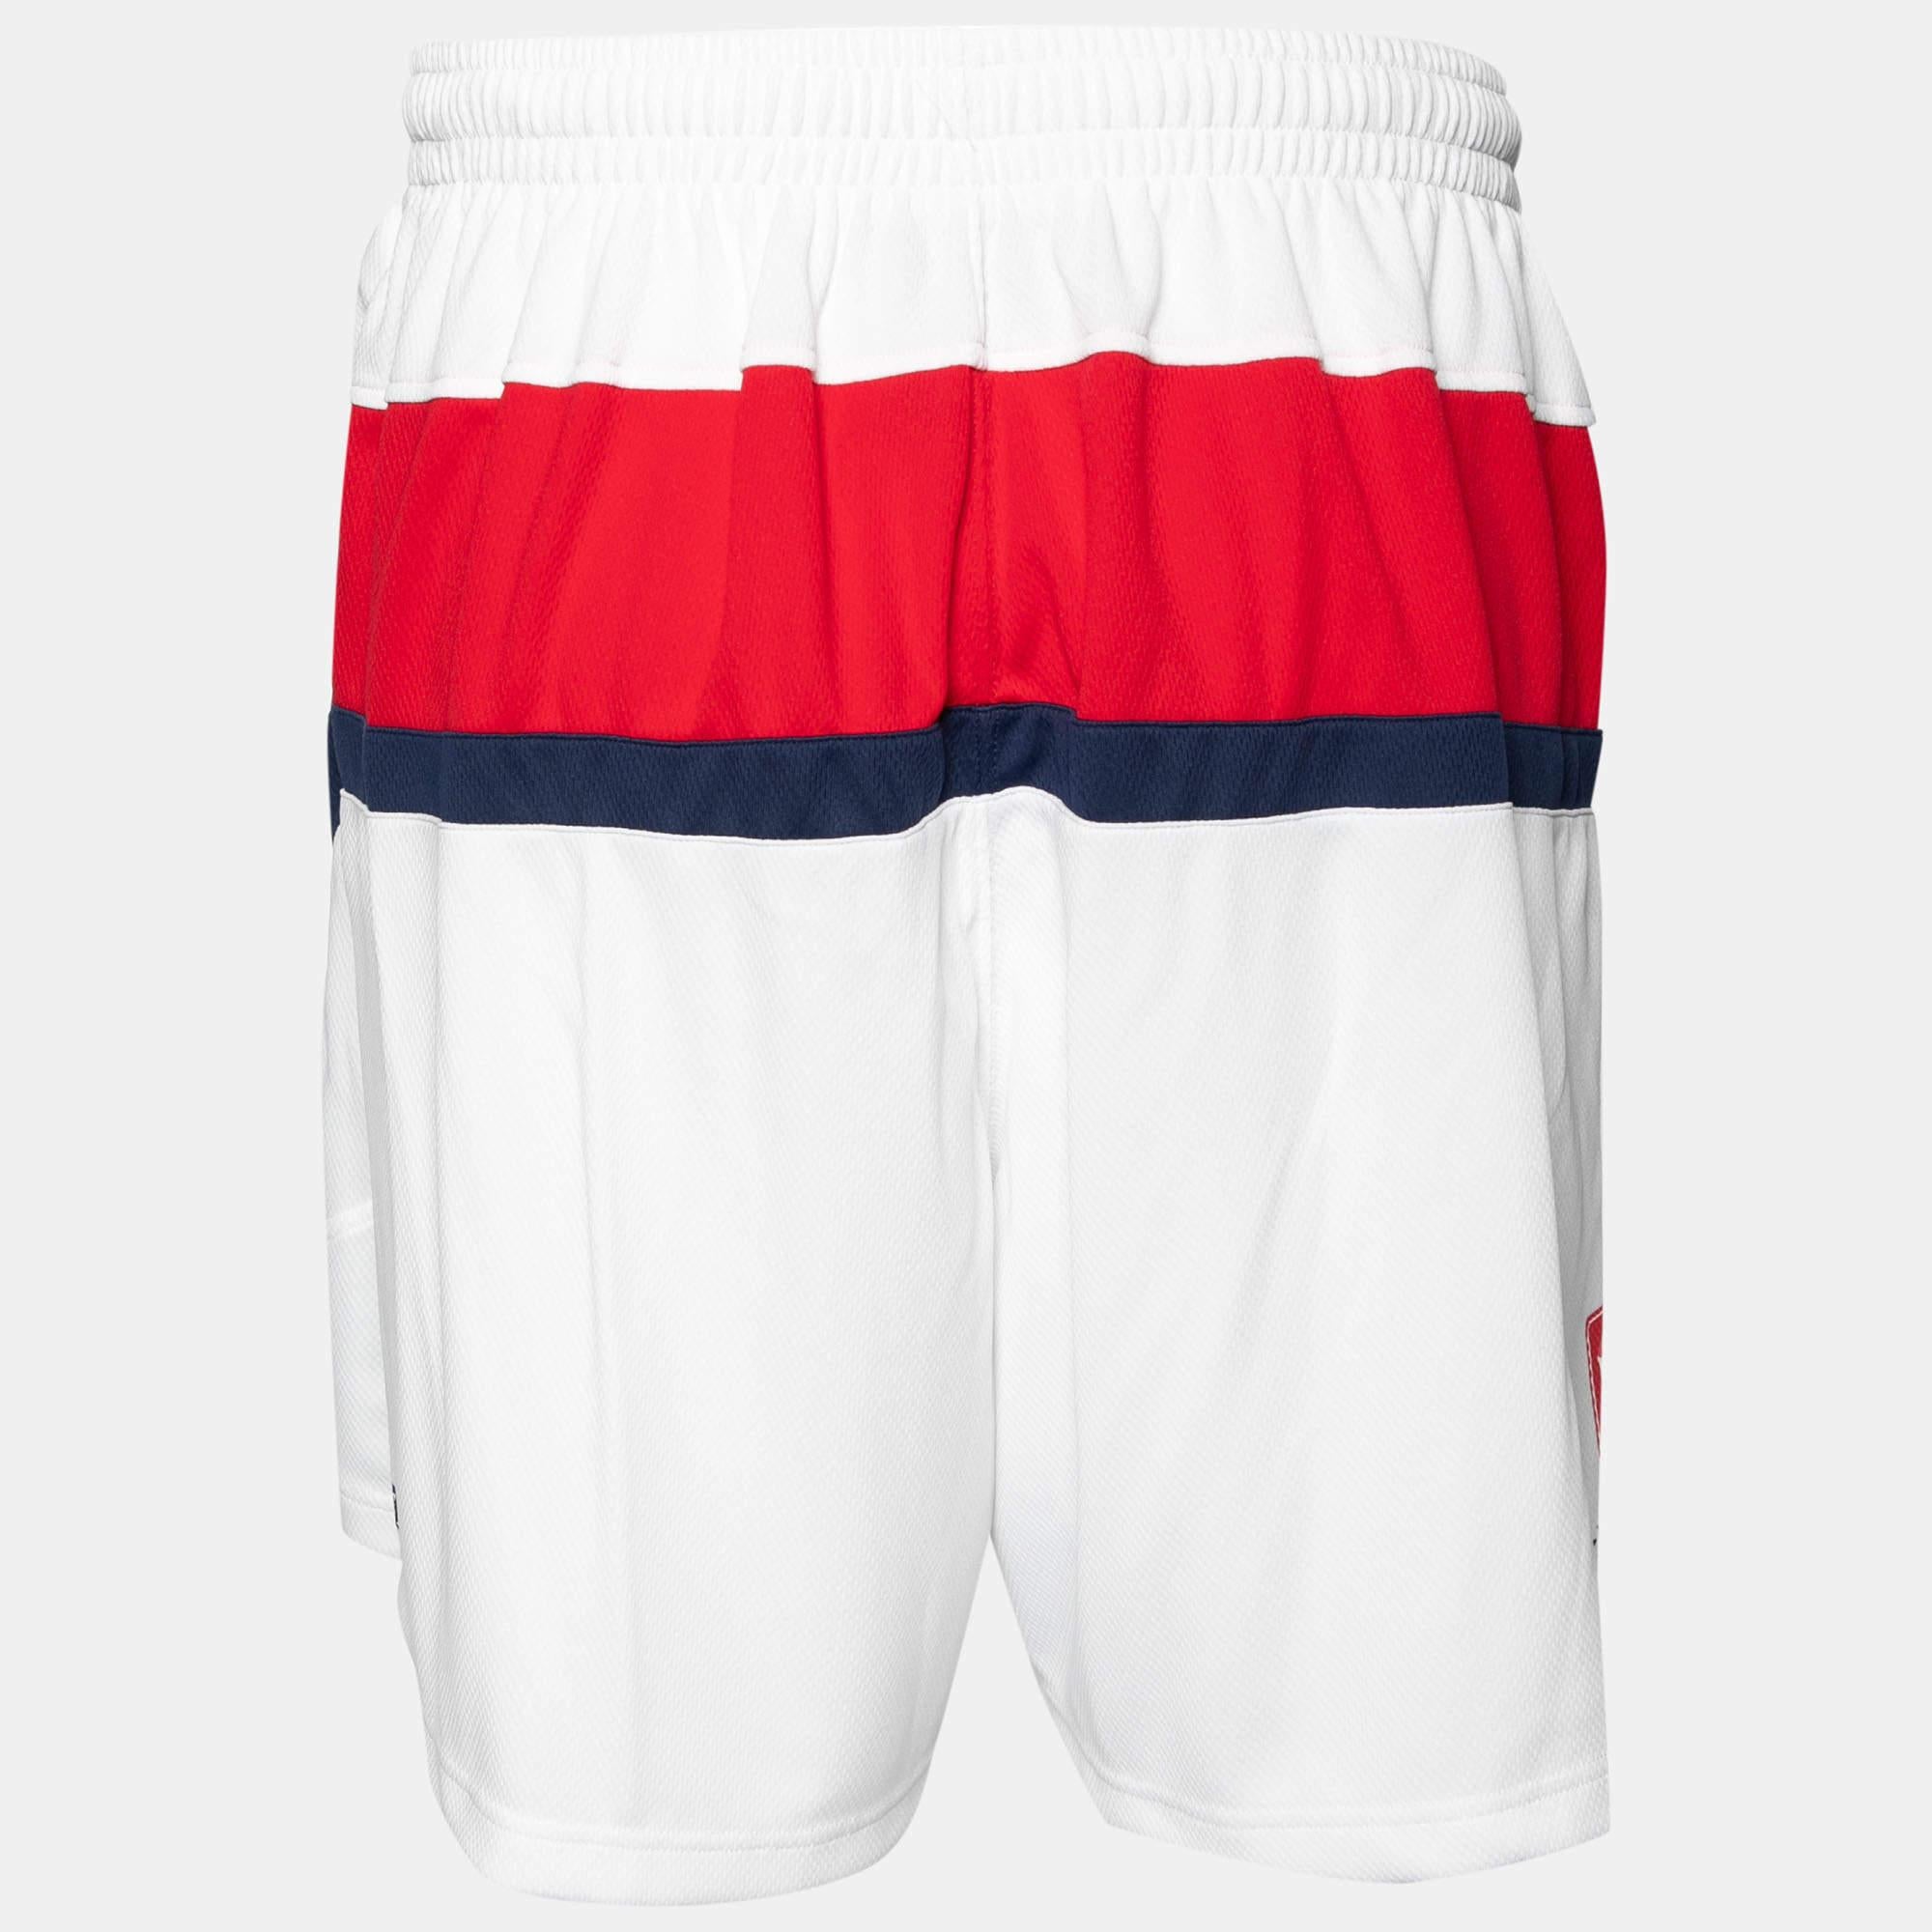 Whether you want to just lounge around or go out to run errands, these Balenciaga shorts will be a stylish pick and will make you feel comfortable all day. It has been made using high-grade materials and the creation will go well with sneakers and